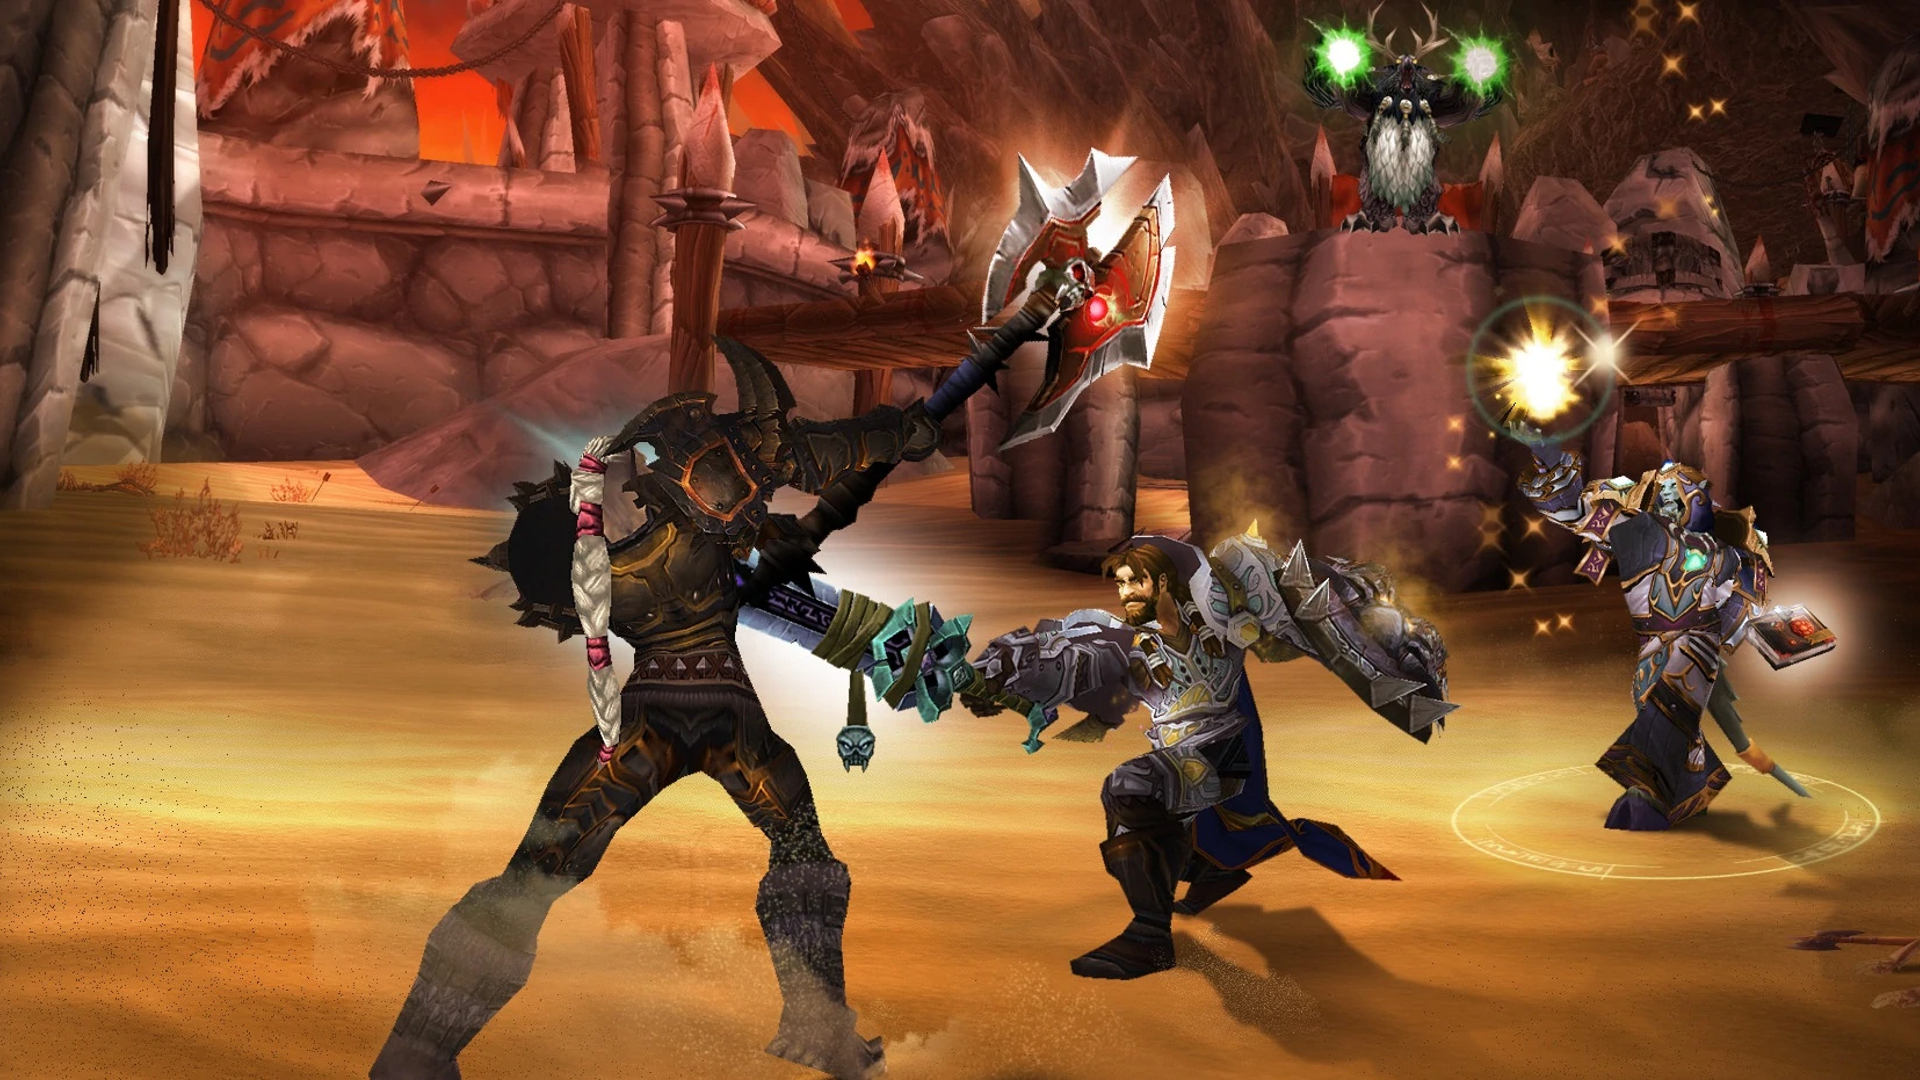 WoW WotLK Classic honor gear is getting a sweet discount